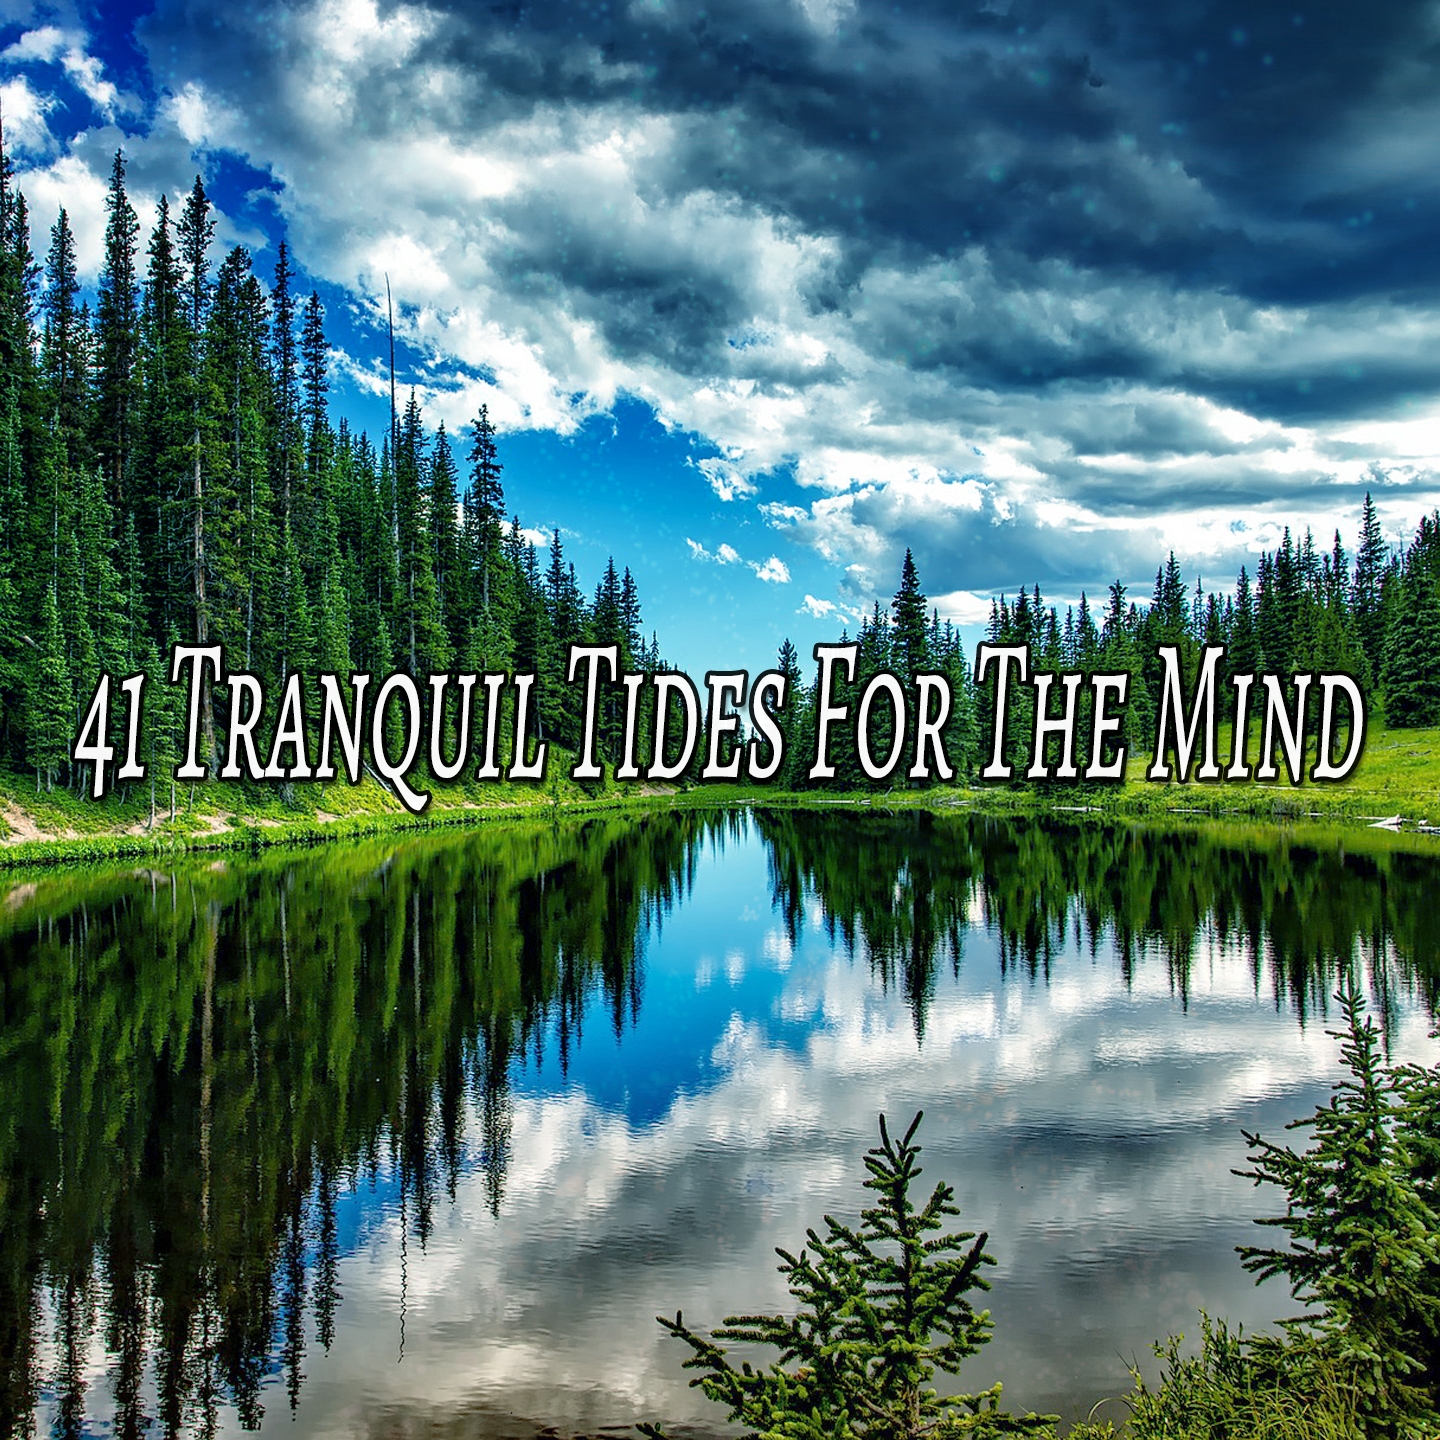 41 Tranquil Tides For The Mind